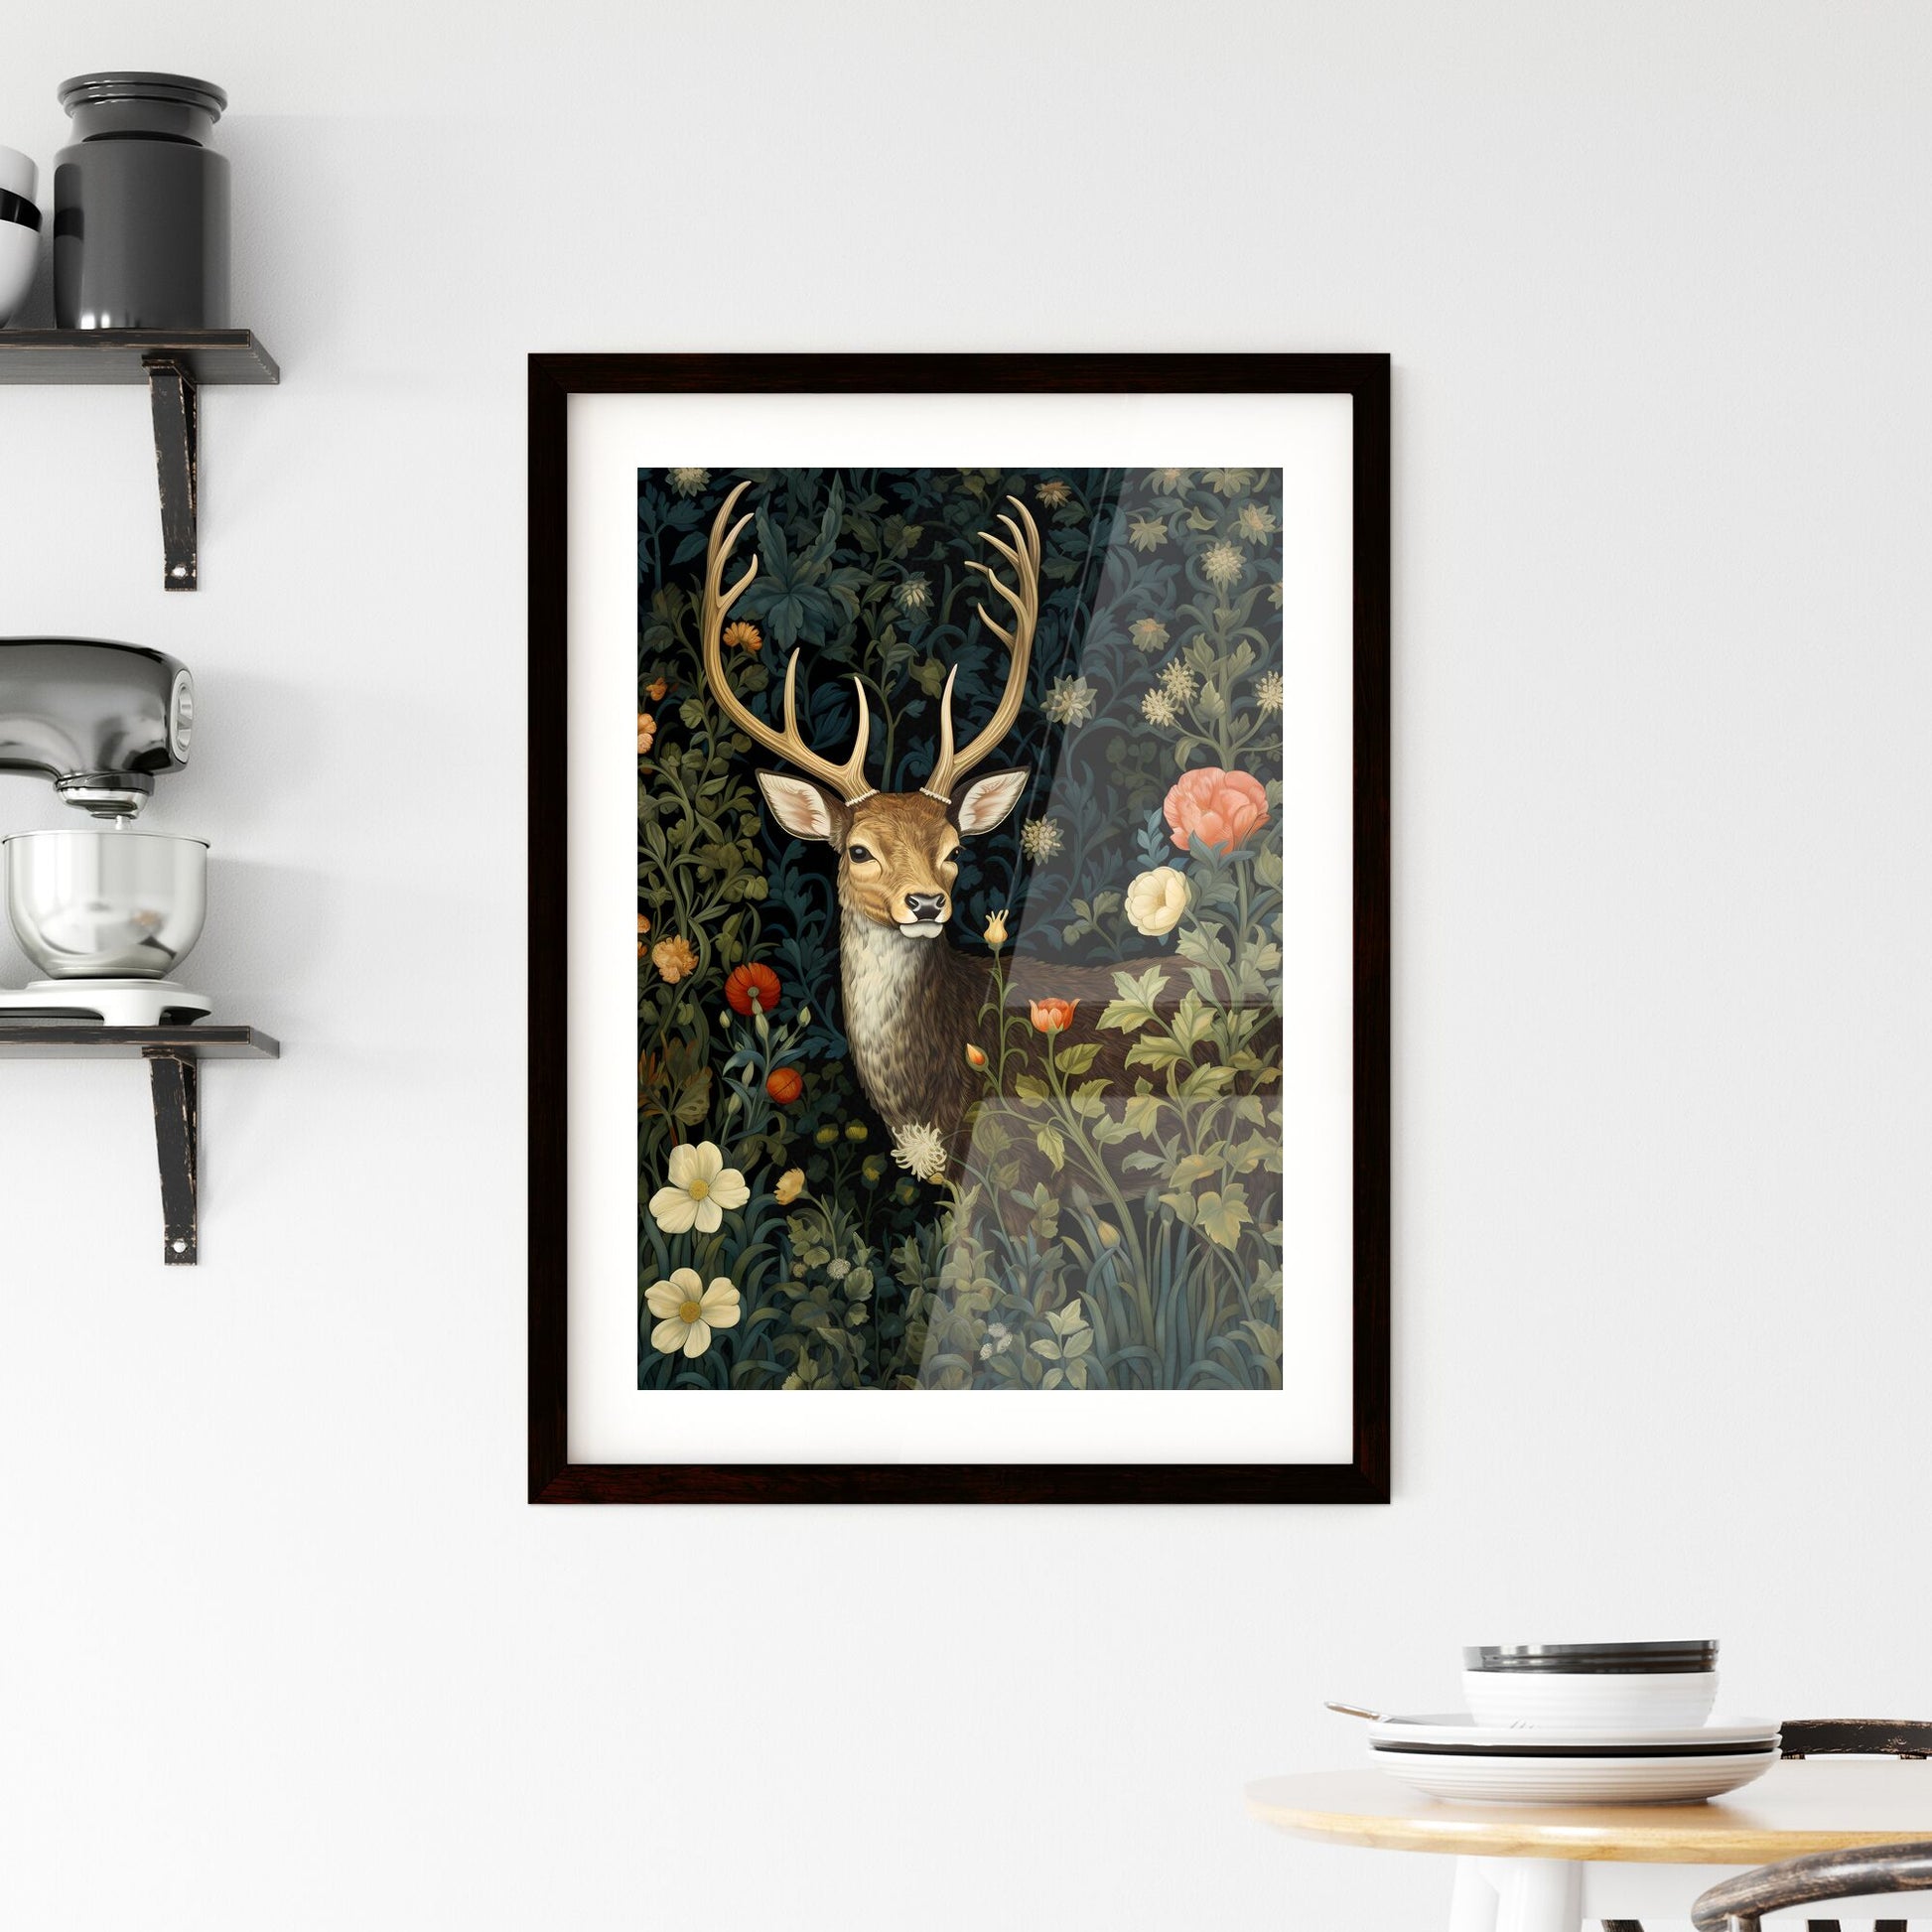 A Poster of a deer in the middle of floral tapestry - A Painting Of A Deer In A Garden Default Title